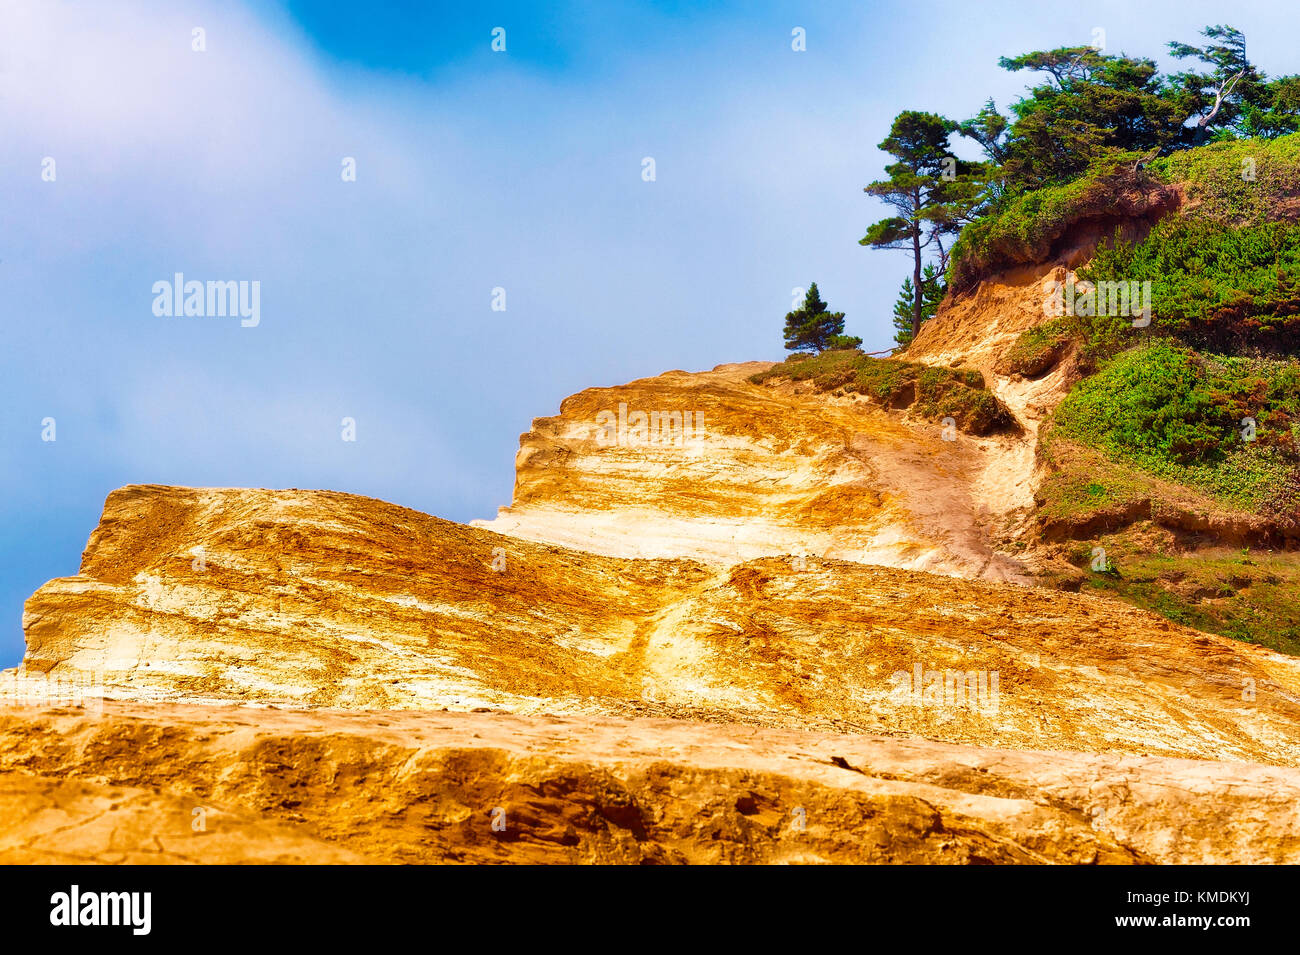 Looking up to the top of Cape Kiwanda sandstone cliffs where trees and shrubs gather at the top under cloudy skies at Pacific City on the Oregon Coa Stock Photo